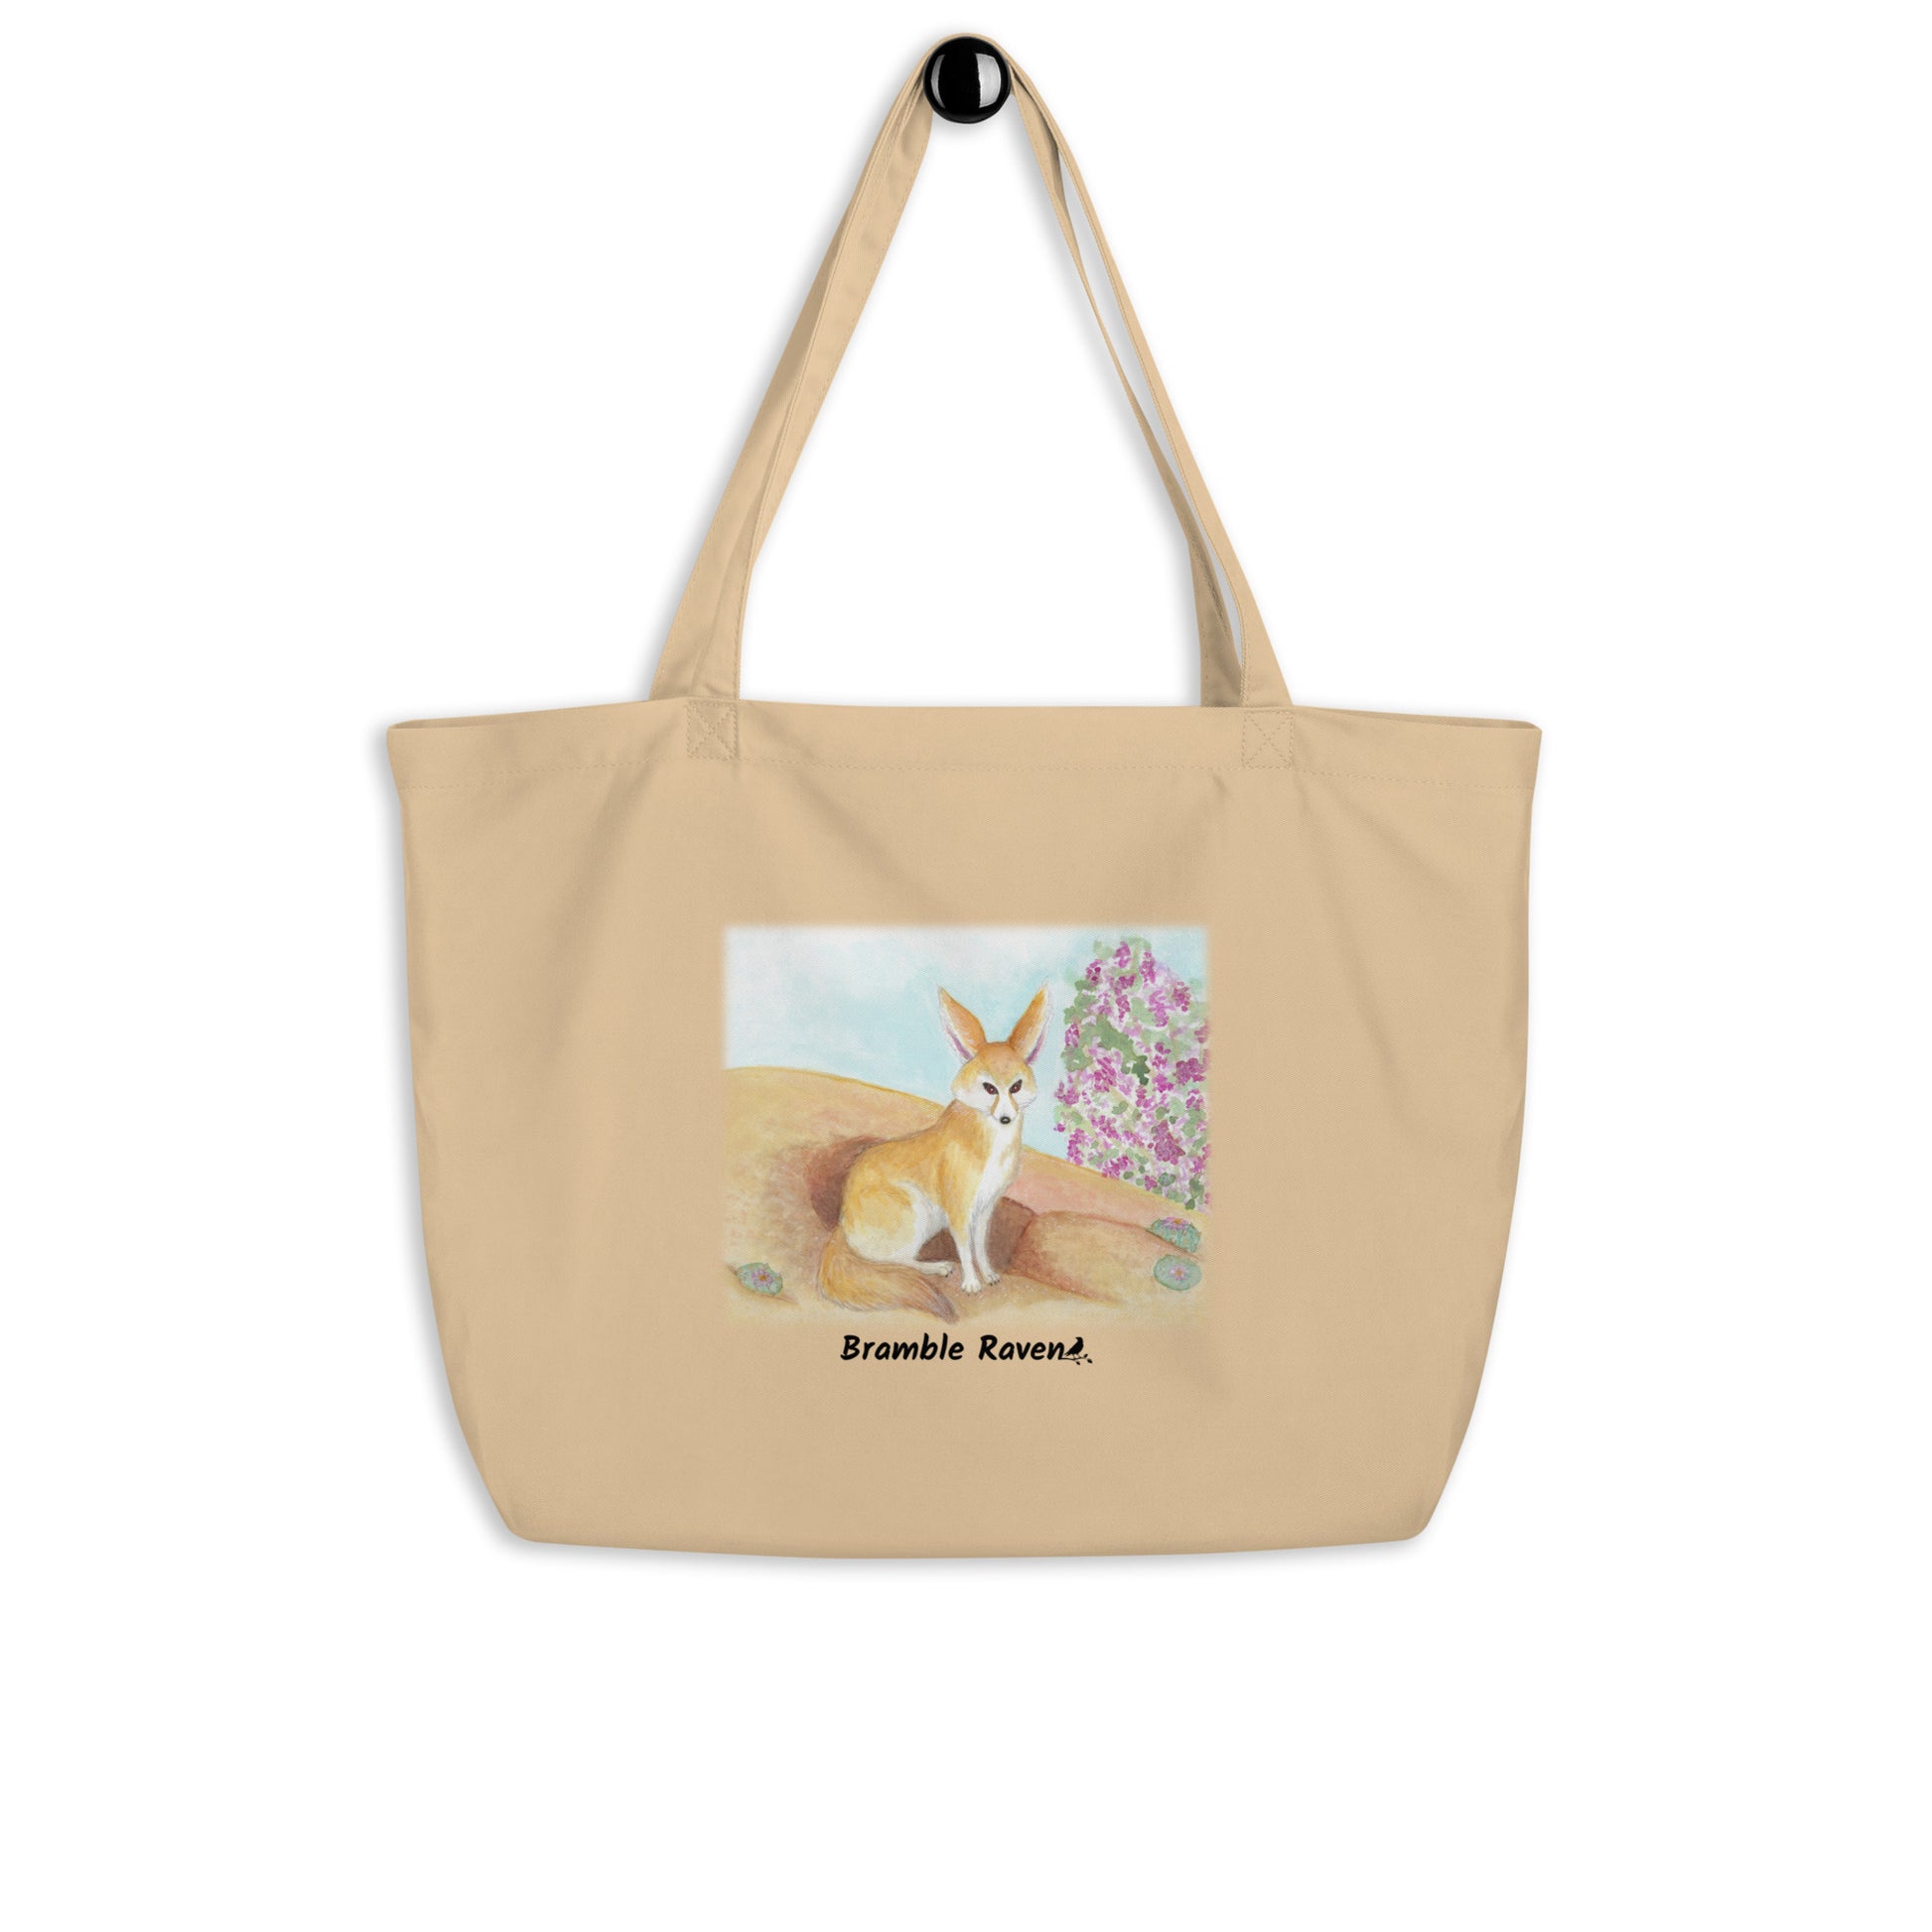 Original watercolor fennec fox painting in the desert. Printed on large oyster-colored eco tote. 20 by 14 by 5 inches. 100% recycled cotton.